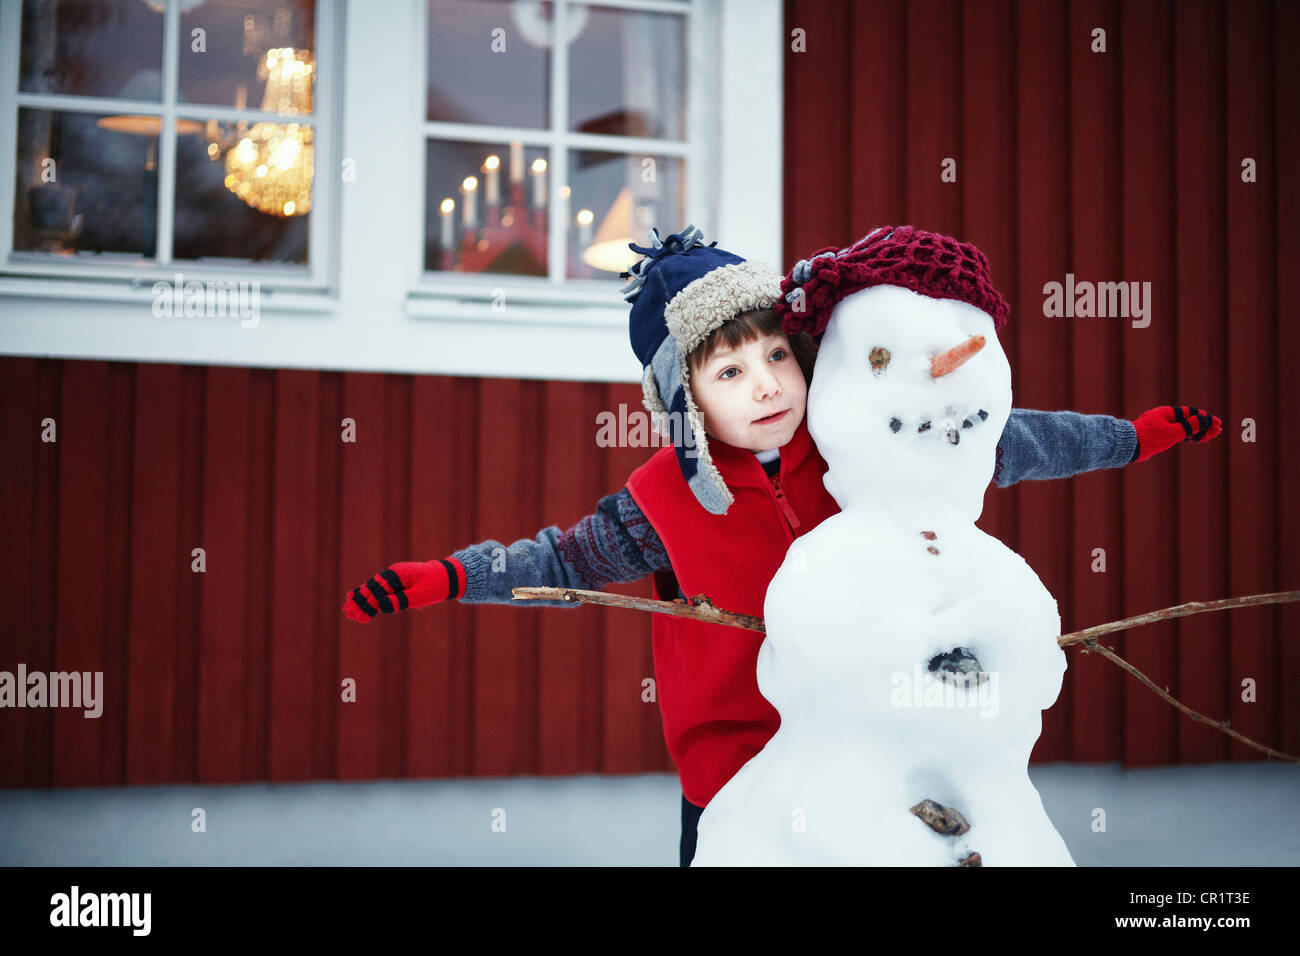 Boy Playing with snowman outdoors Banque D'Images